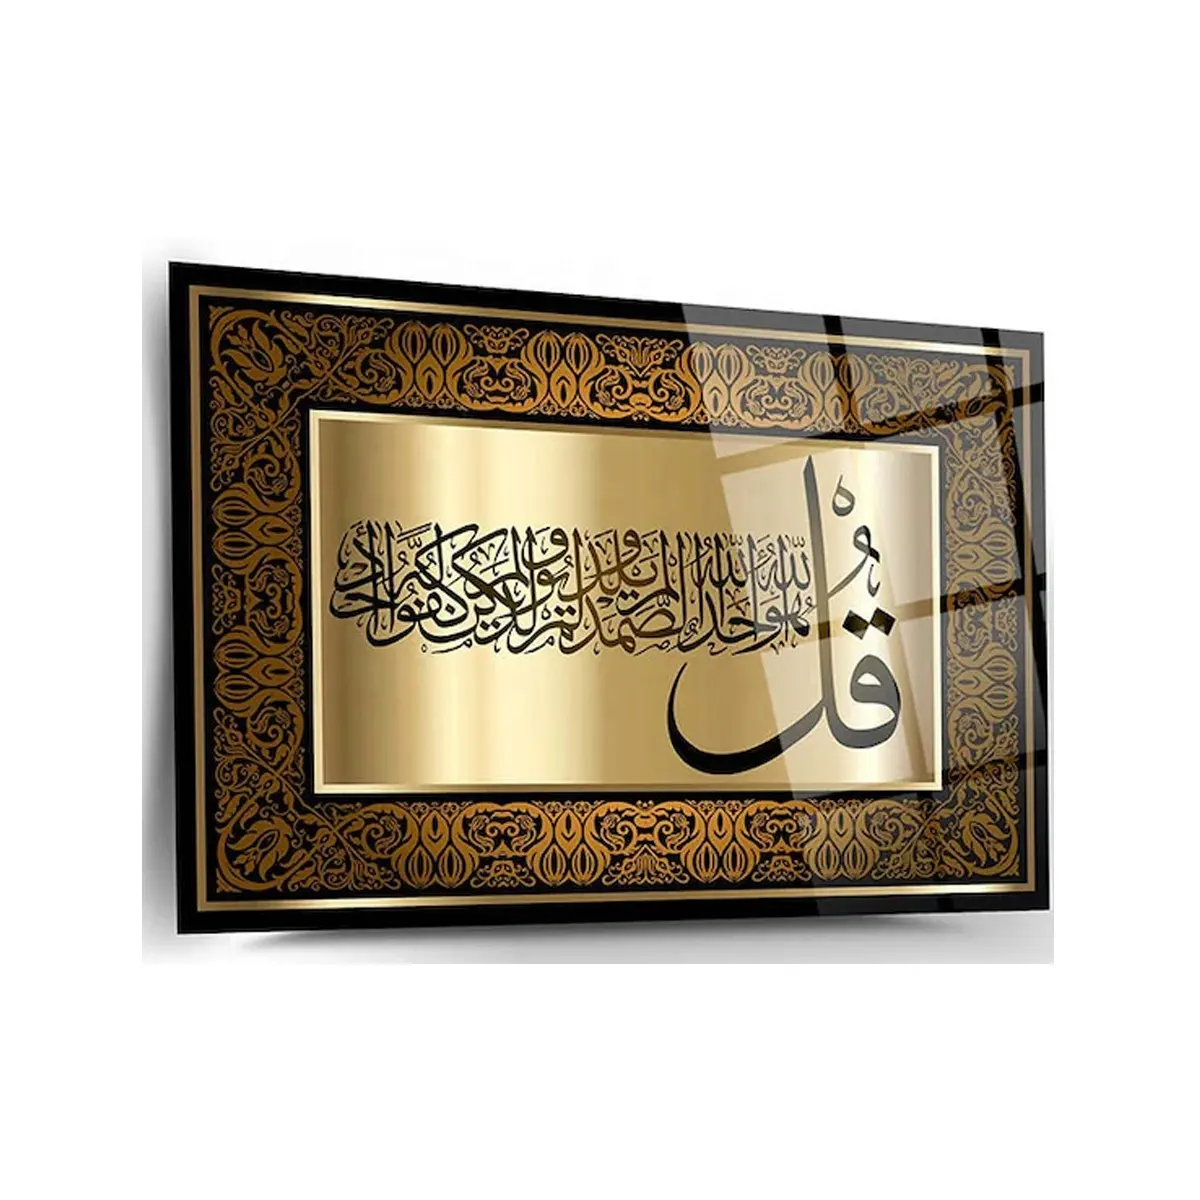 Islamic wall art Arabic script decorative crystal porcelain glass painting for home and hotel decor